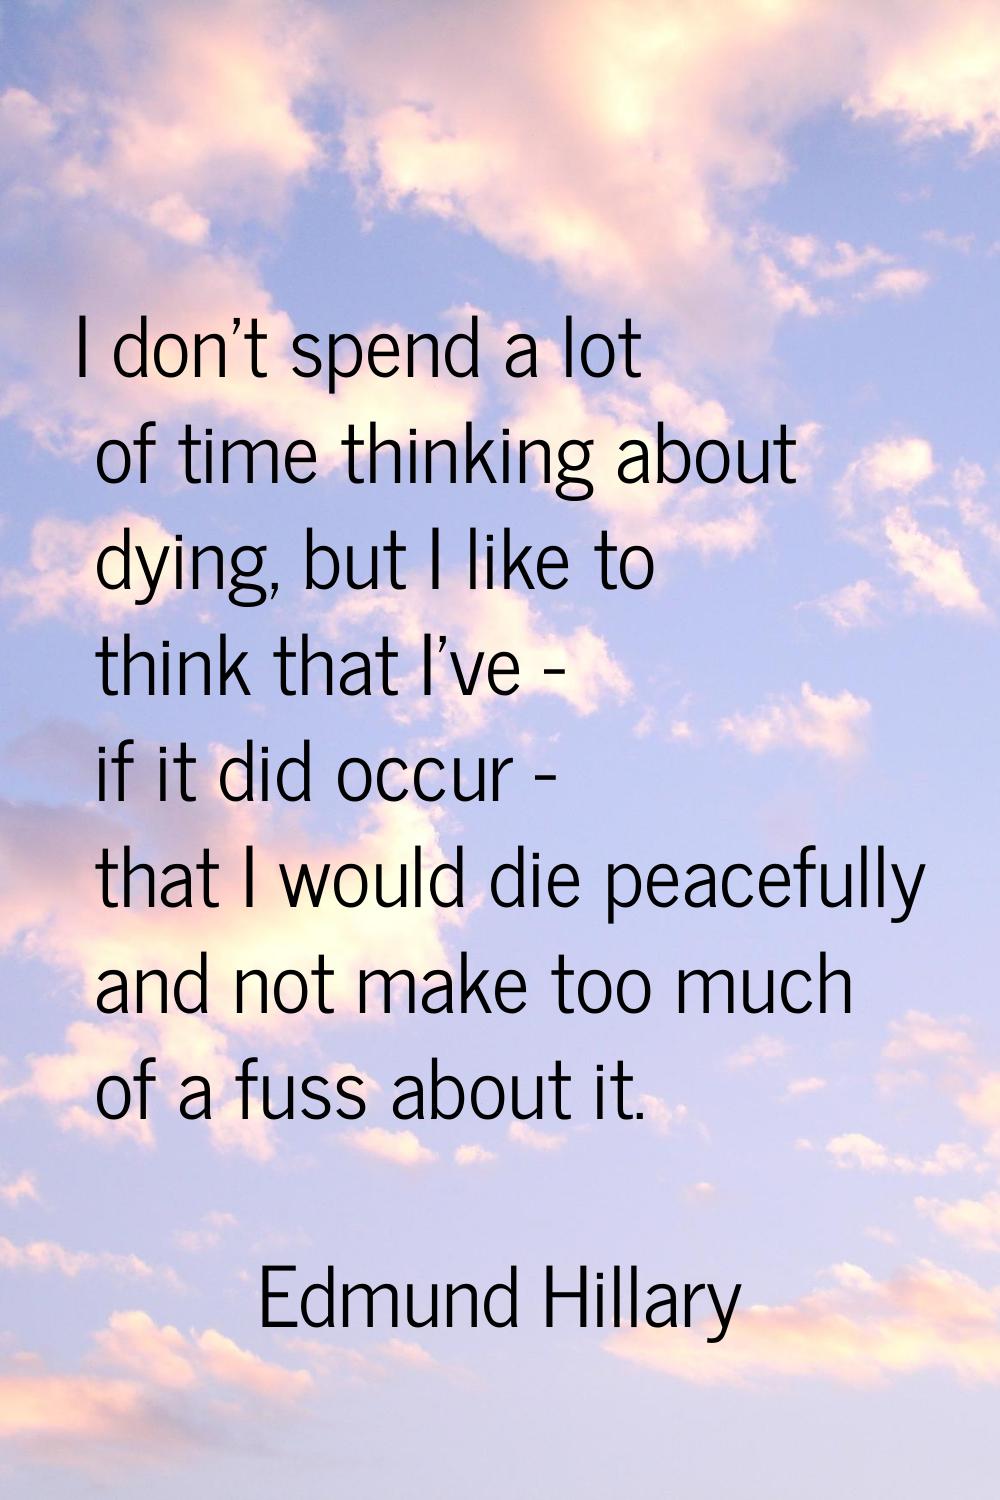 I don't spend a lot of time thinking about dying, but I like to think that I've - if it did occur -